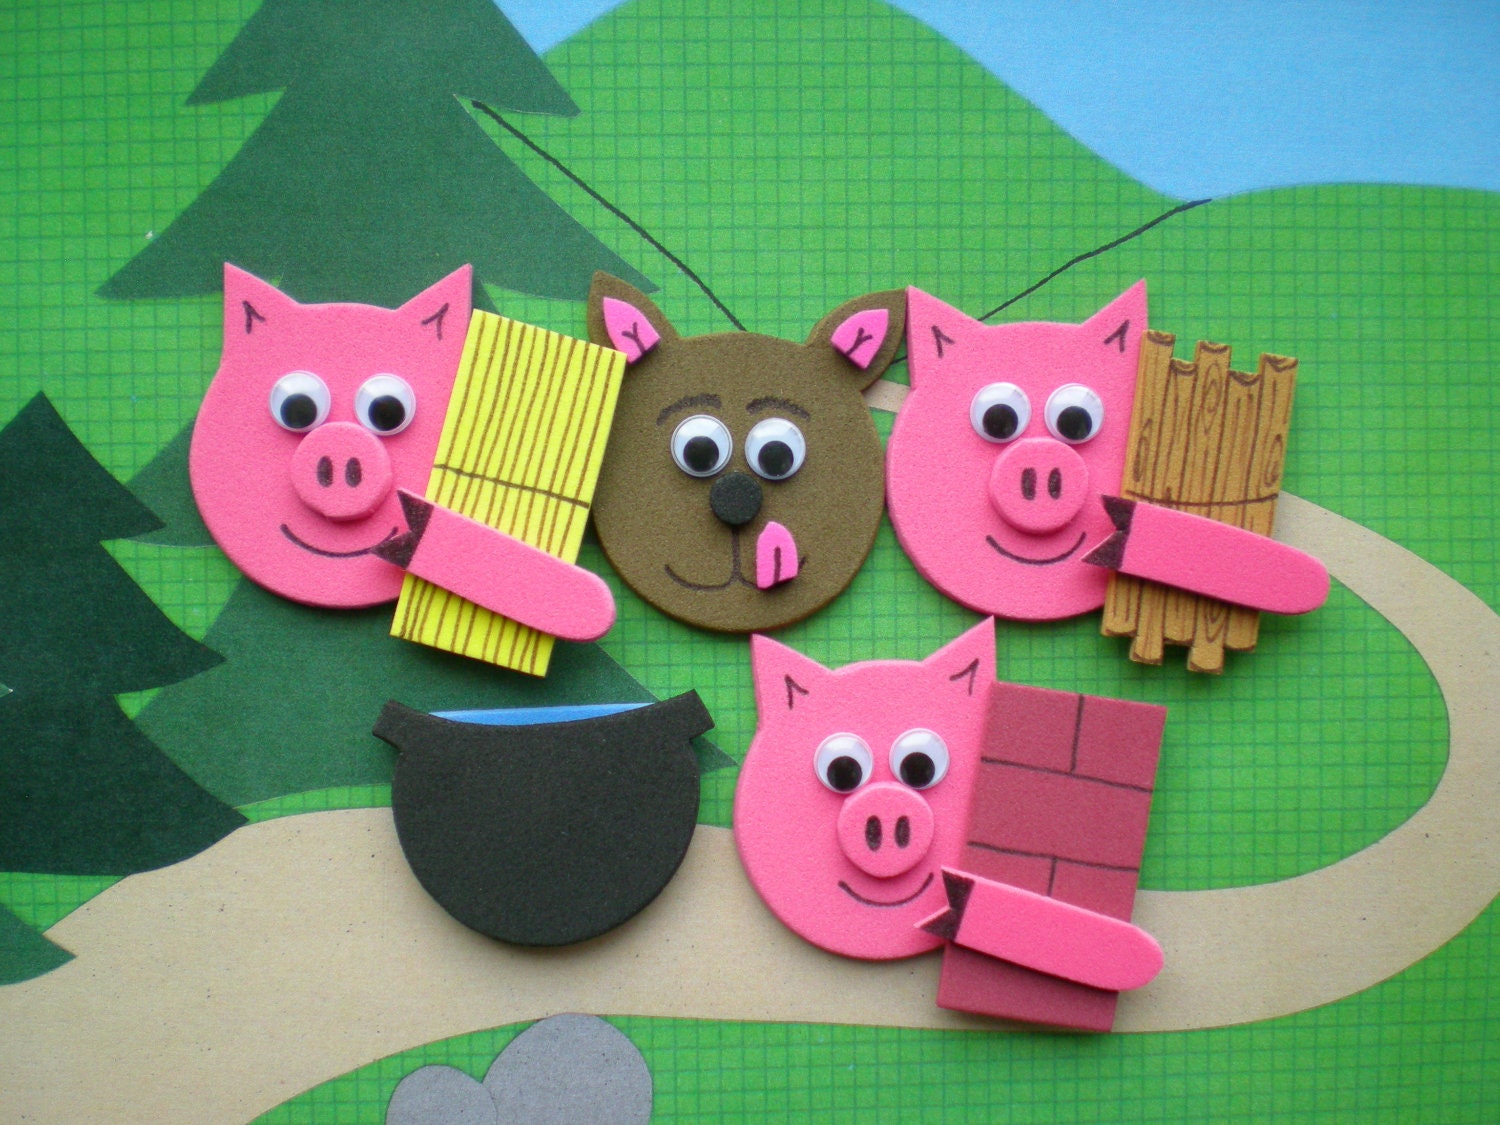 The Three Little Pigs Story Pieces , Felt Board Stories, Flannel Board Stories - SoSimpleSoSweet